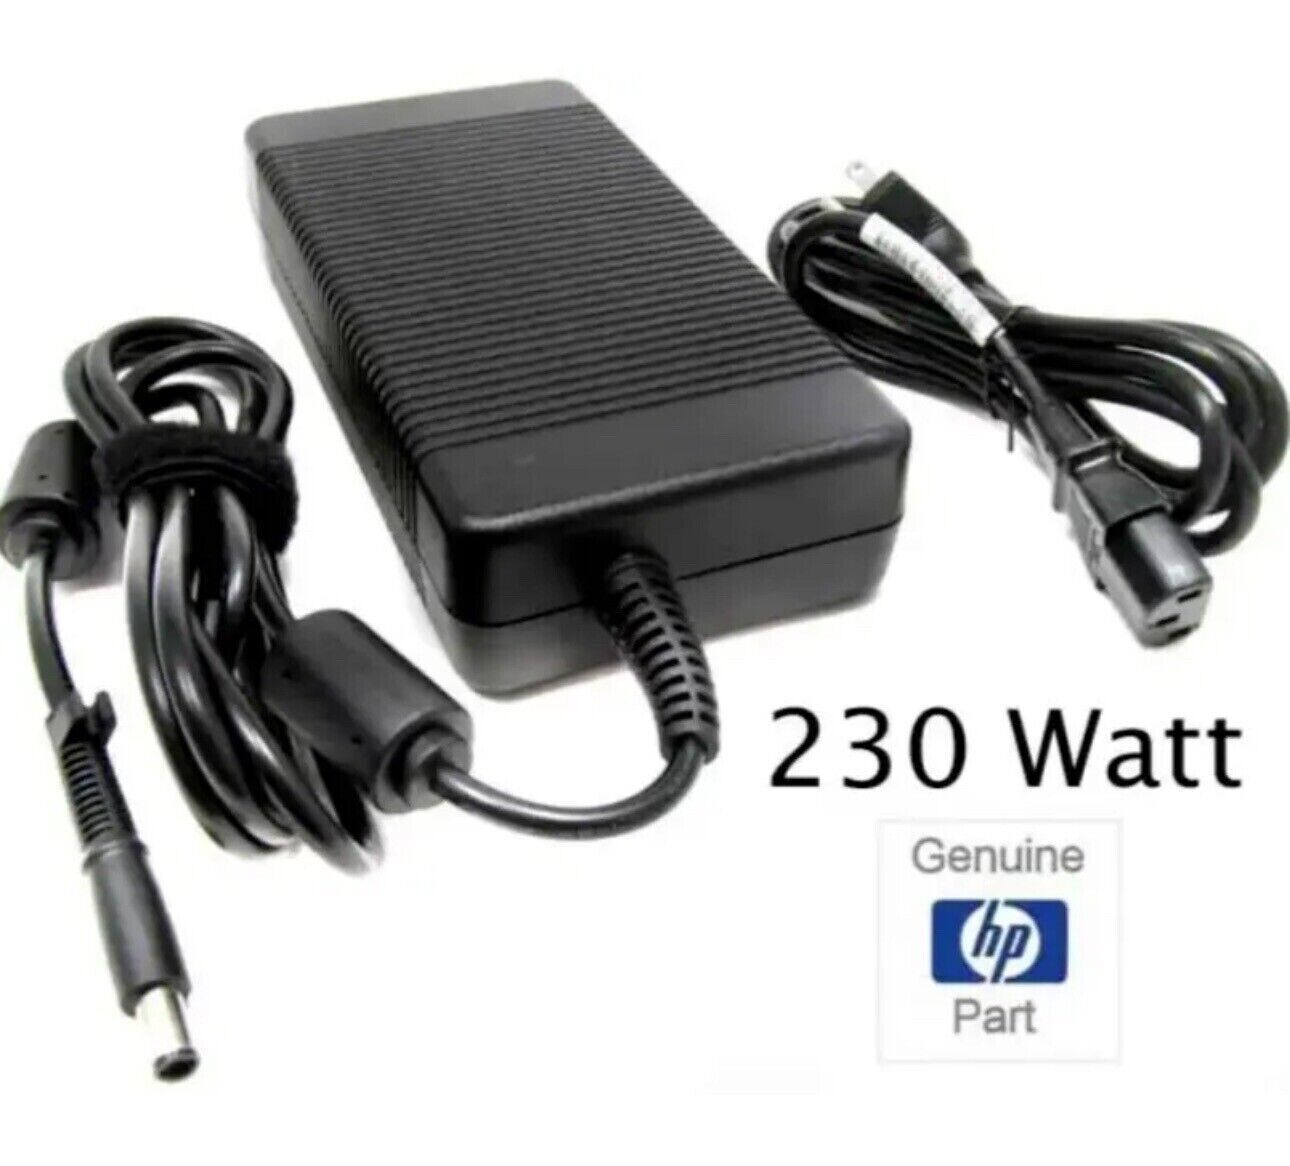 230w Genuine AC Adapter Charger HP ZBook 15 17 G2 Workstation 677765-001 7.4*5.0